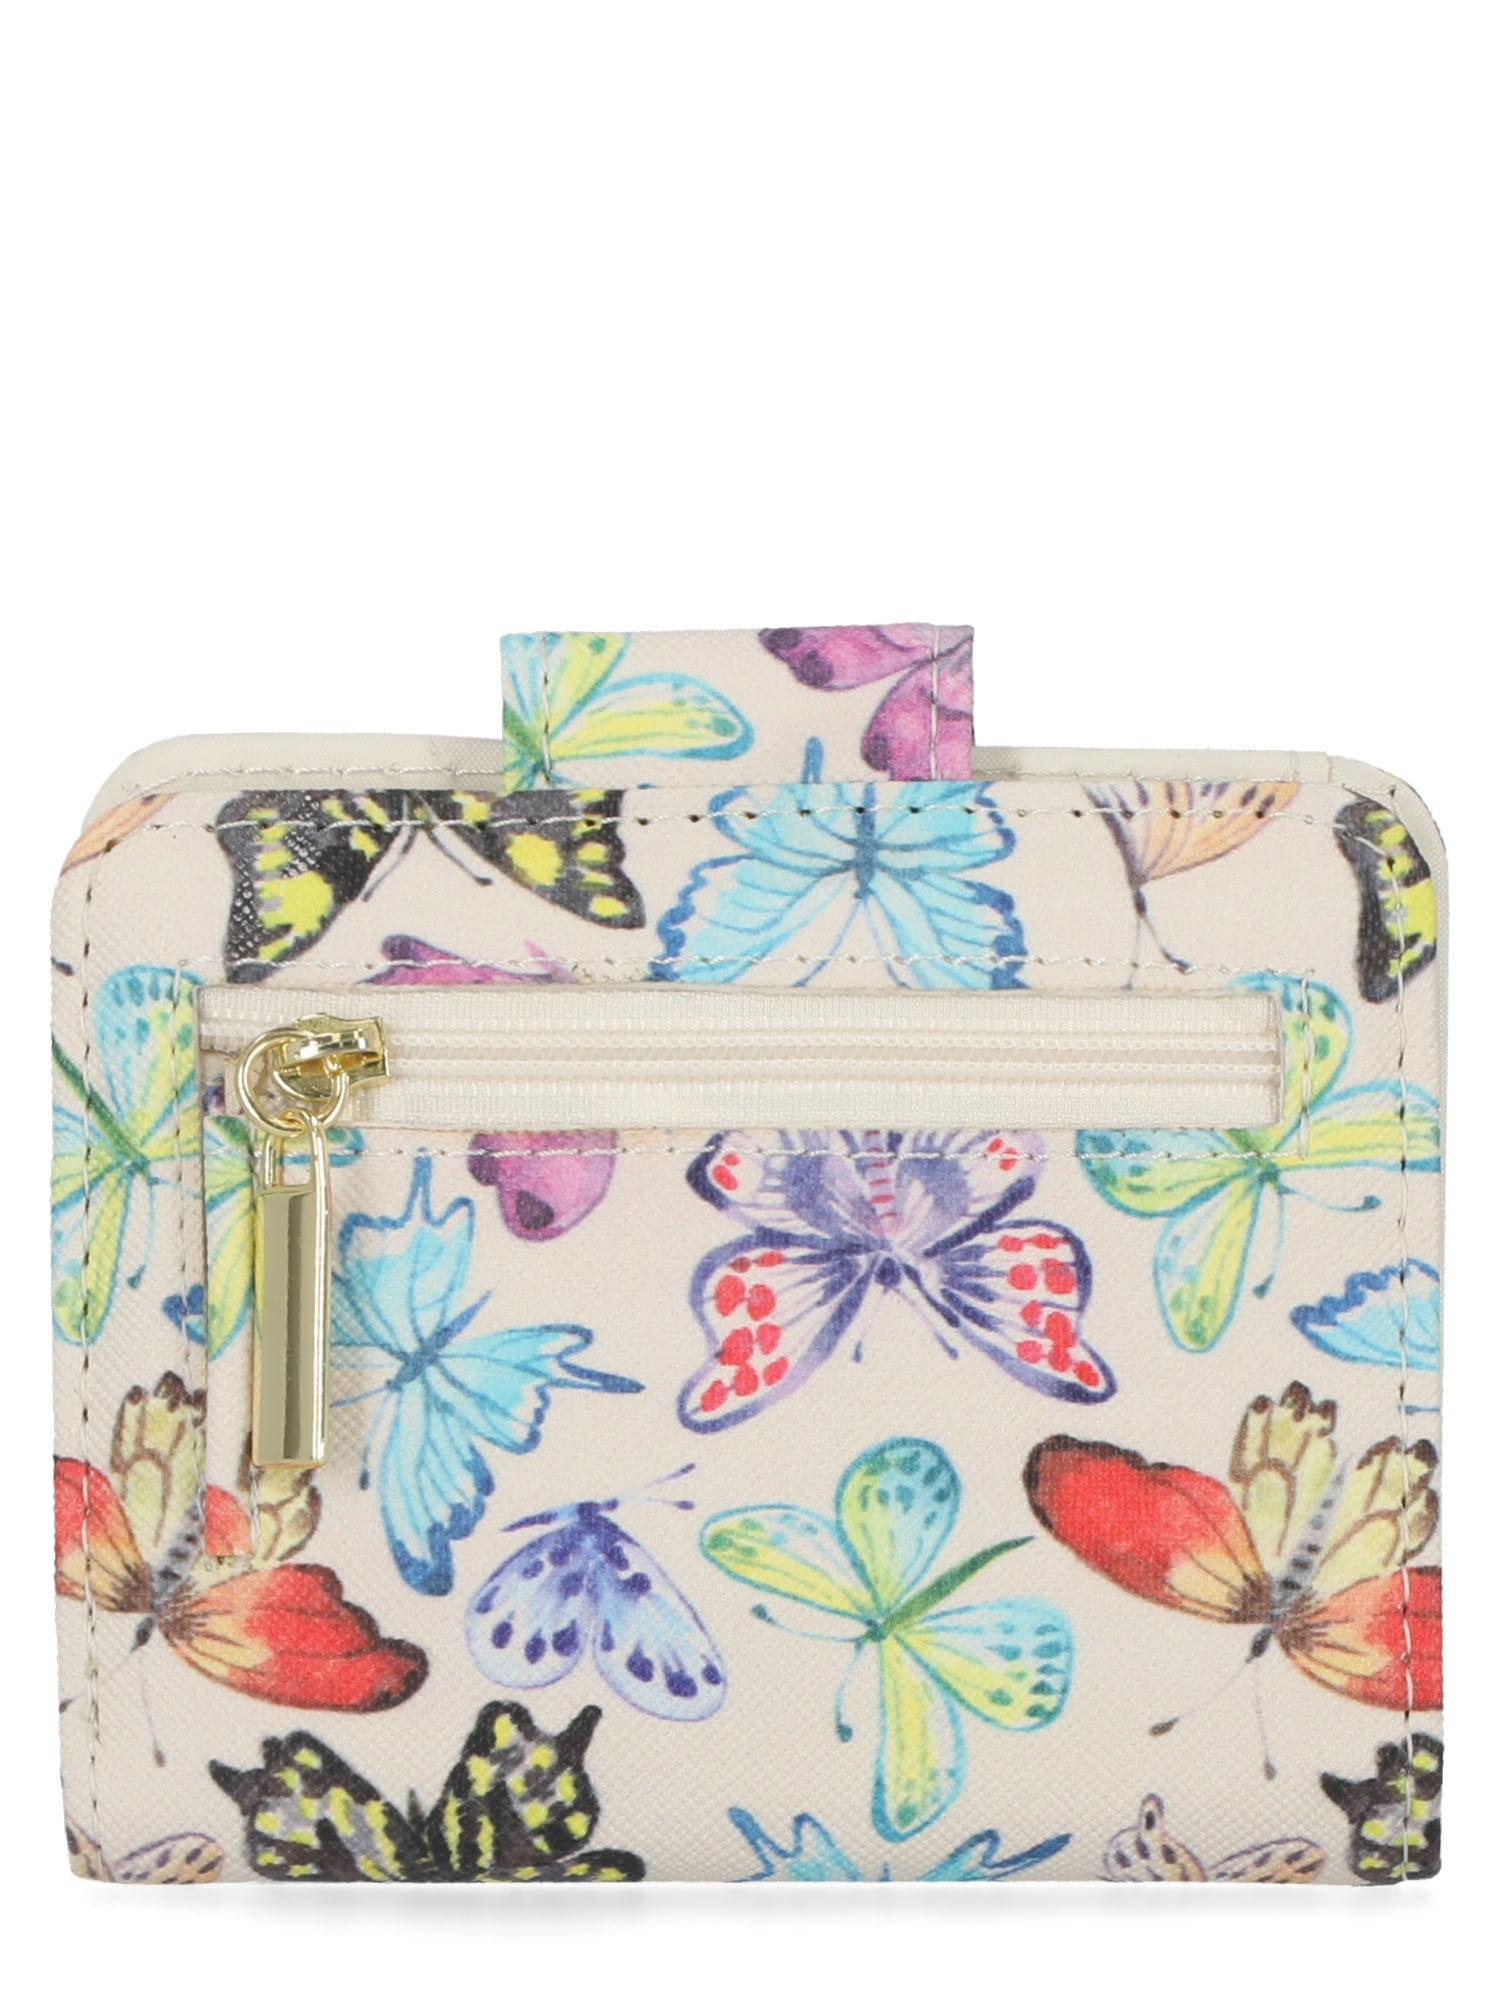 Time and Tru Women's Sharon Two fold Wallet Vinyl Butterfly Print